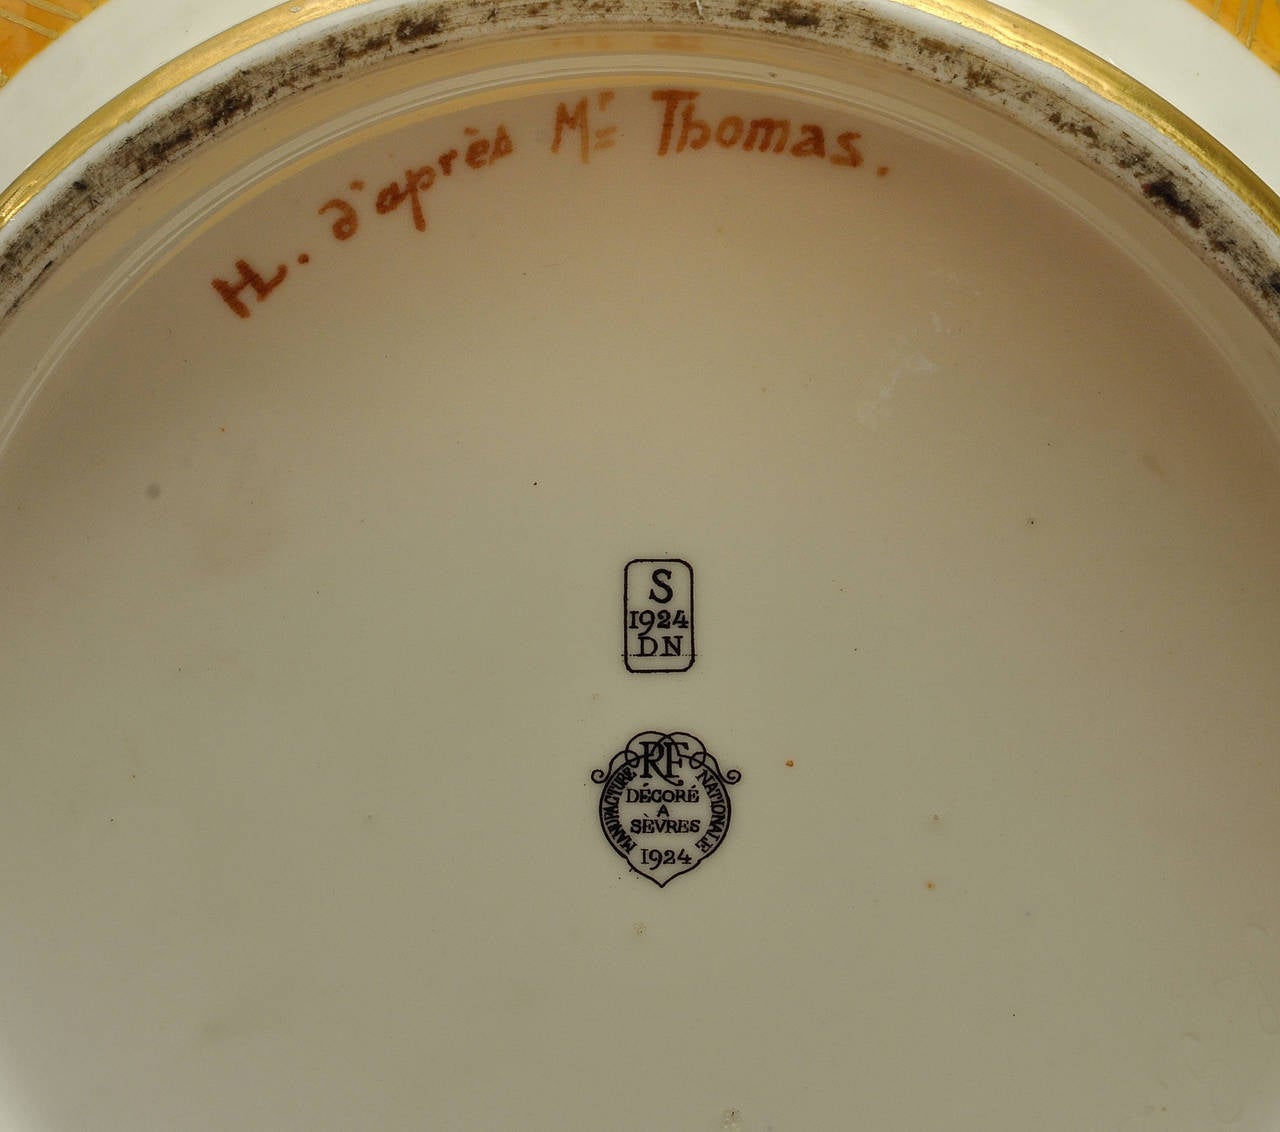 Early 20th Century Highly Important 1924 Manufacture Nationale de Sèvres Porcelain Vase For Sale